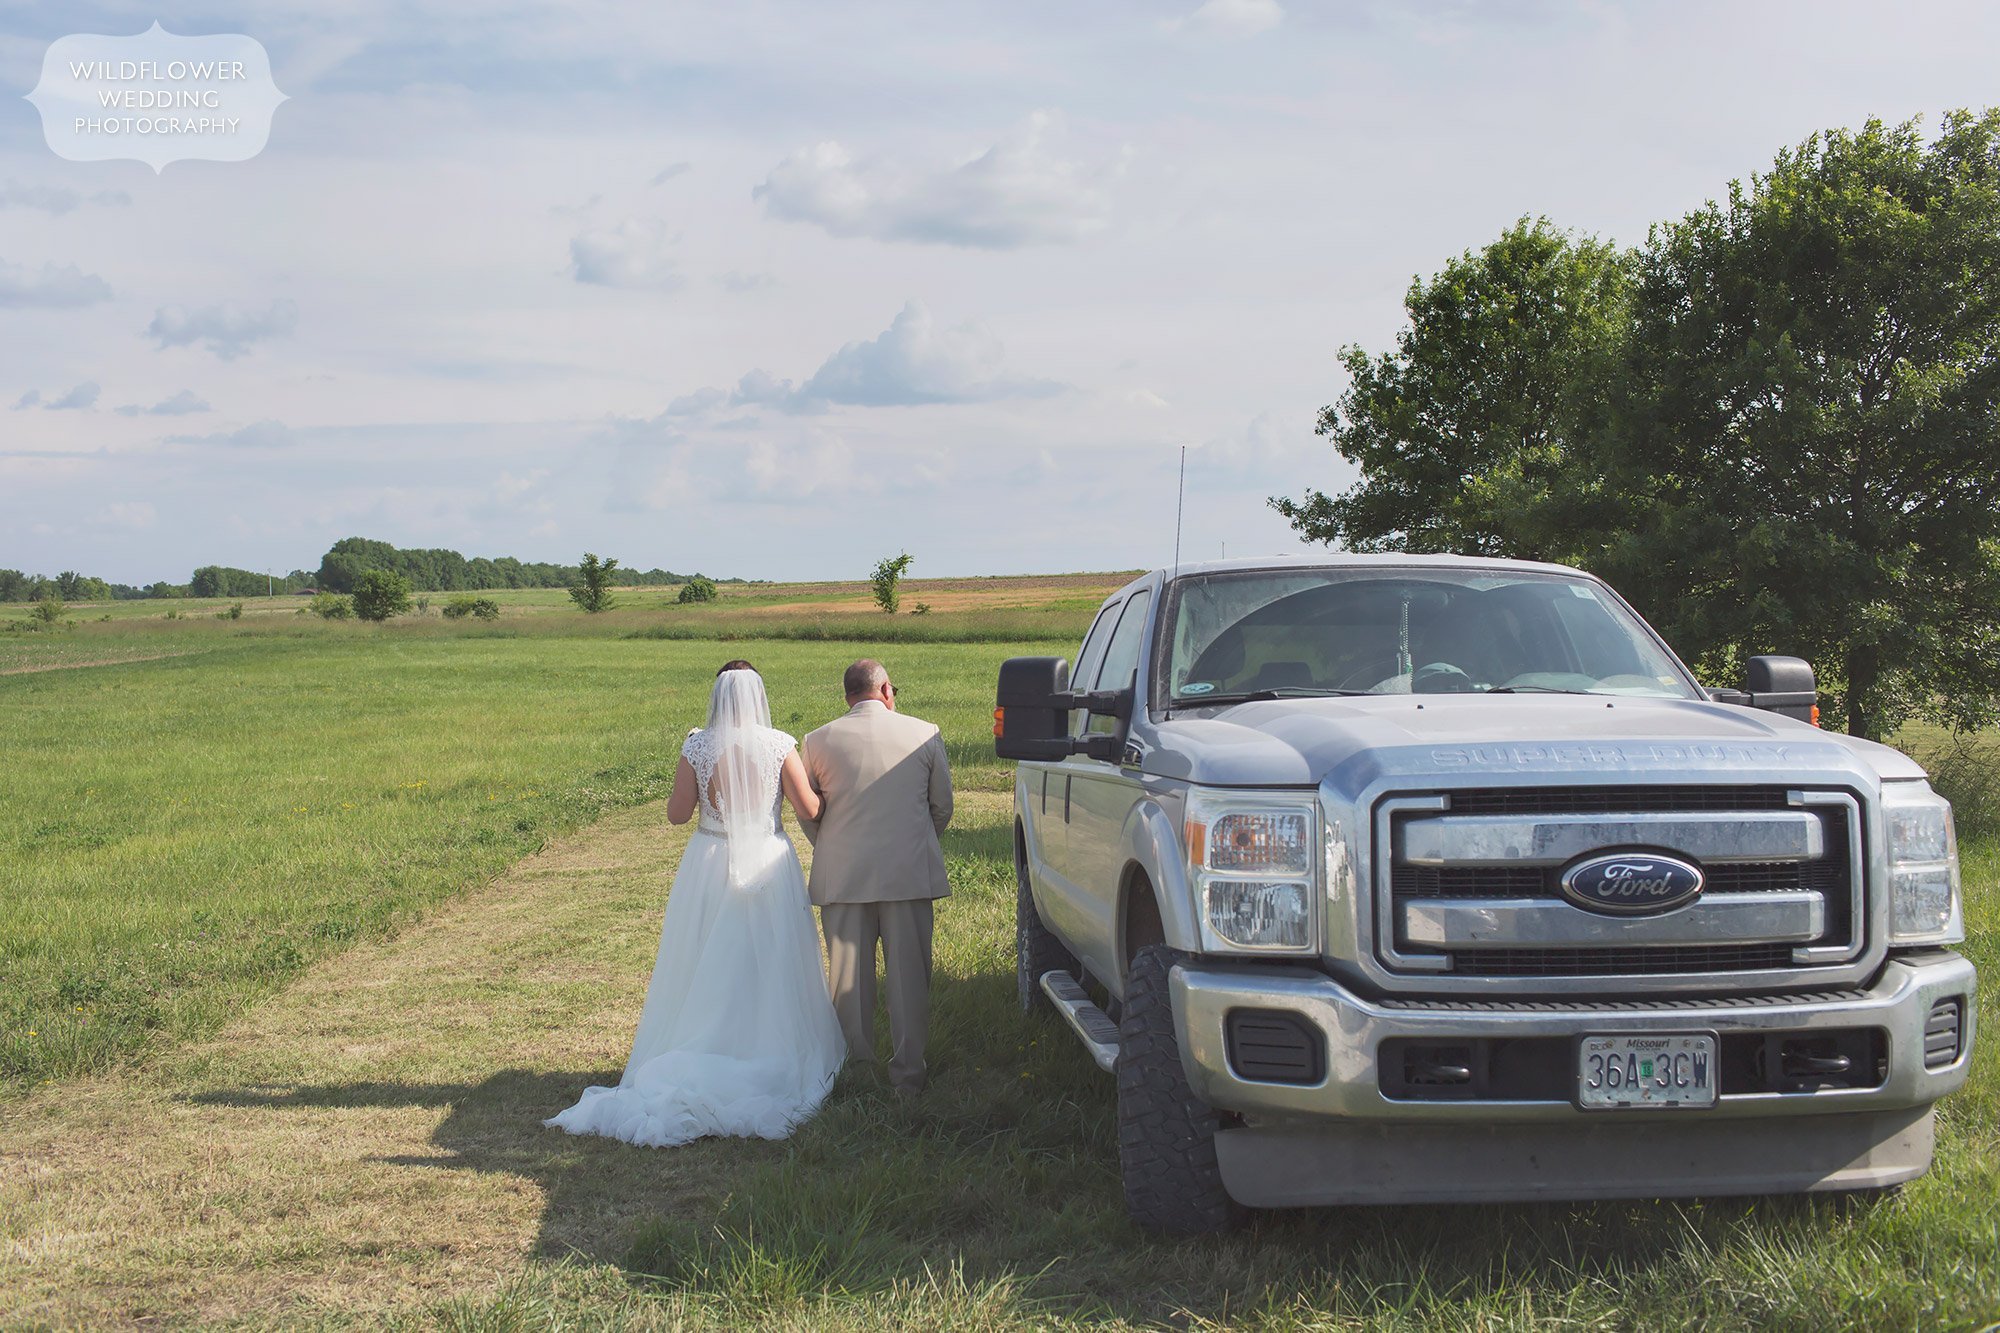 The bride and her dad stand next to his Ford truck before walking down the aisle at their outdoor country wedding in Columbia, MO.